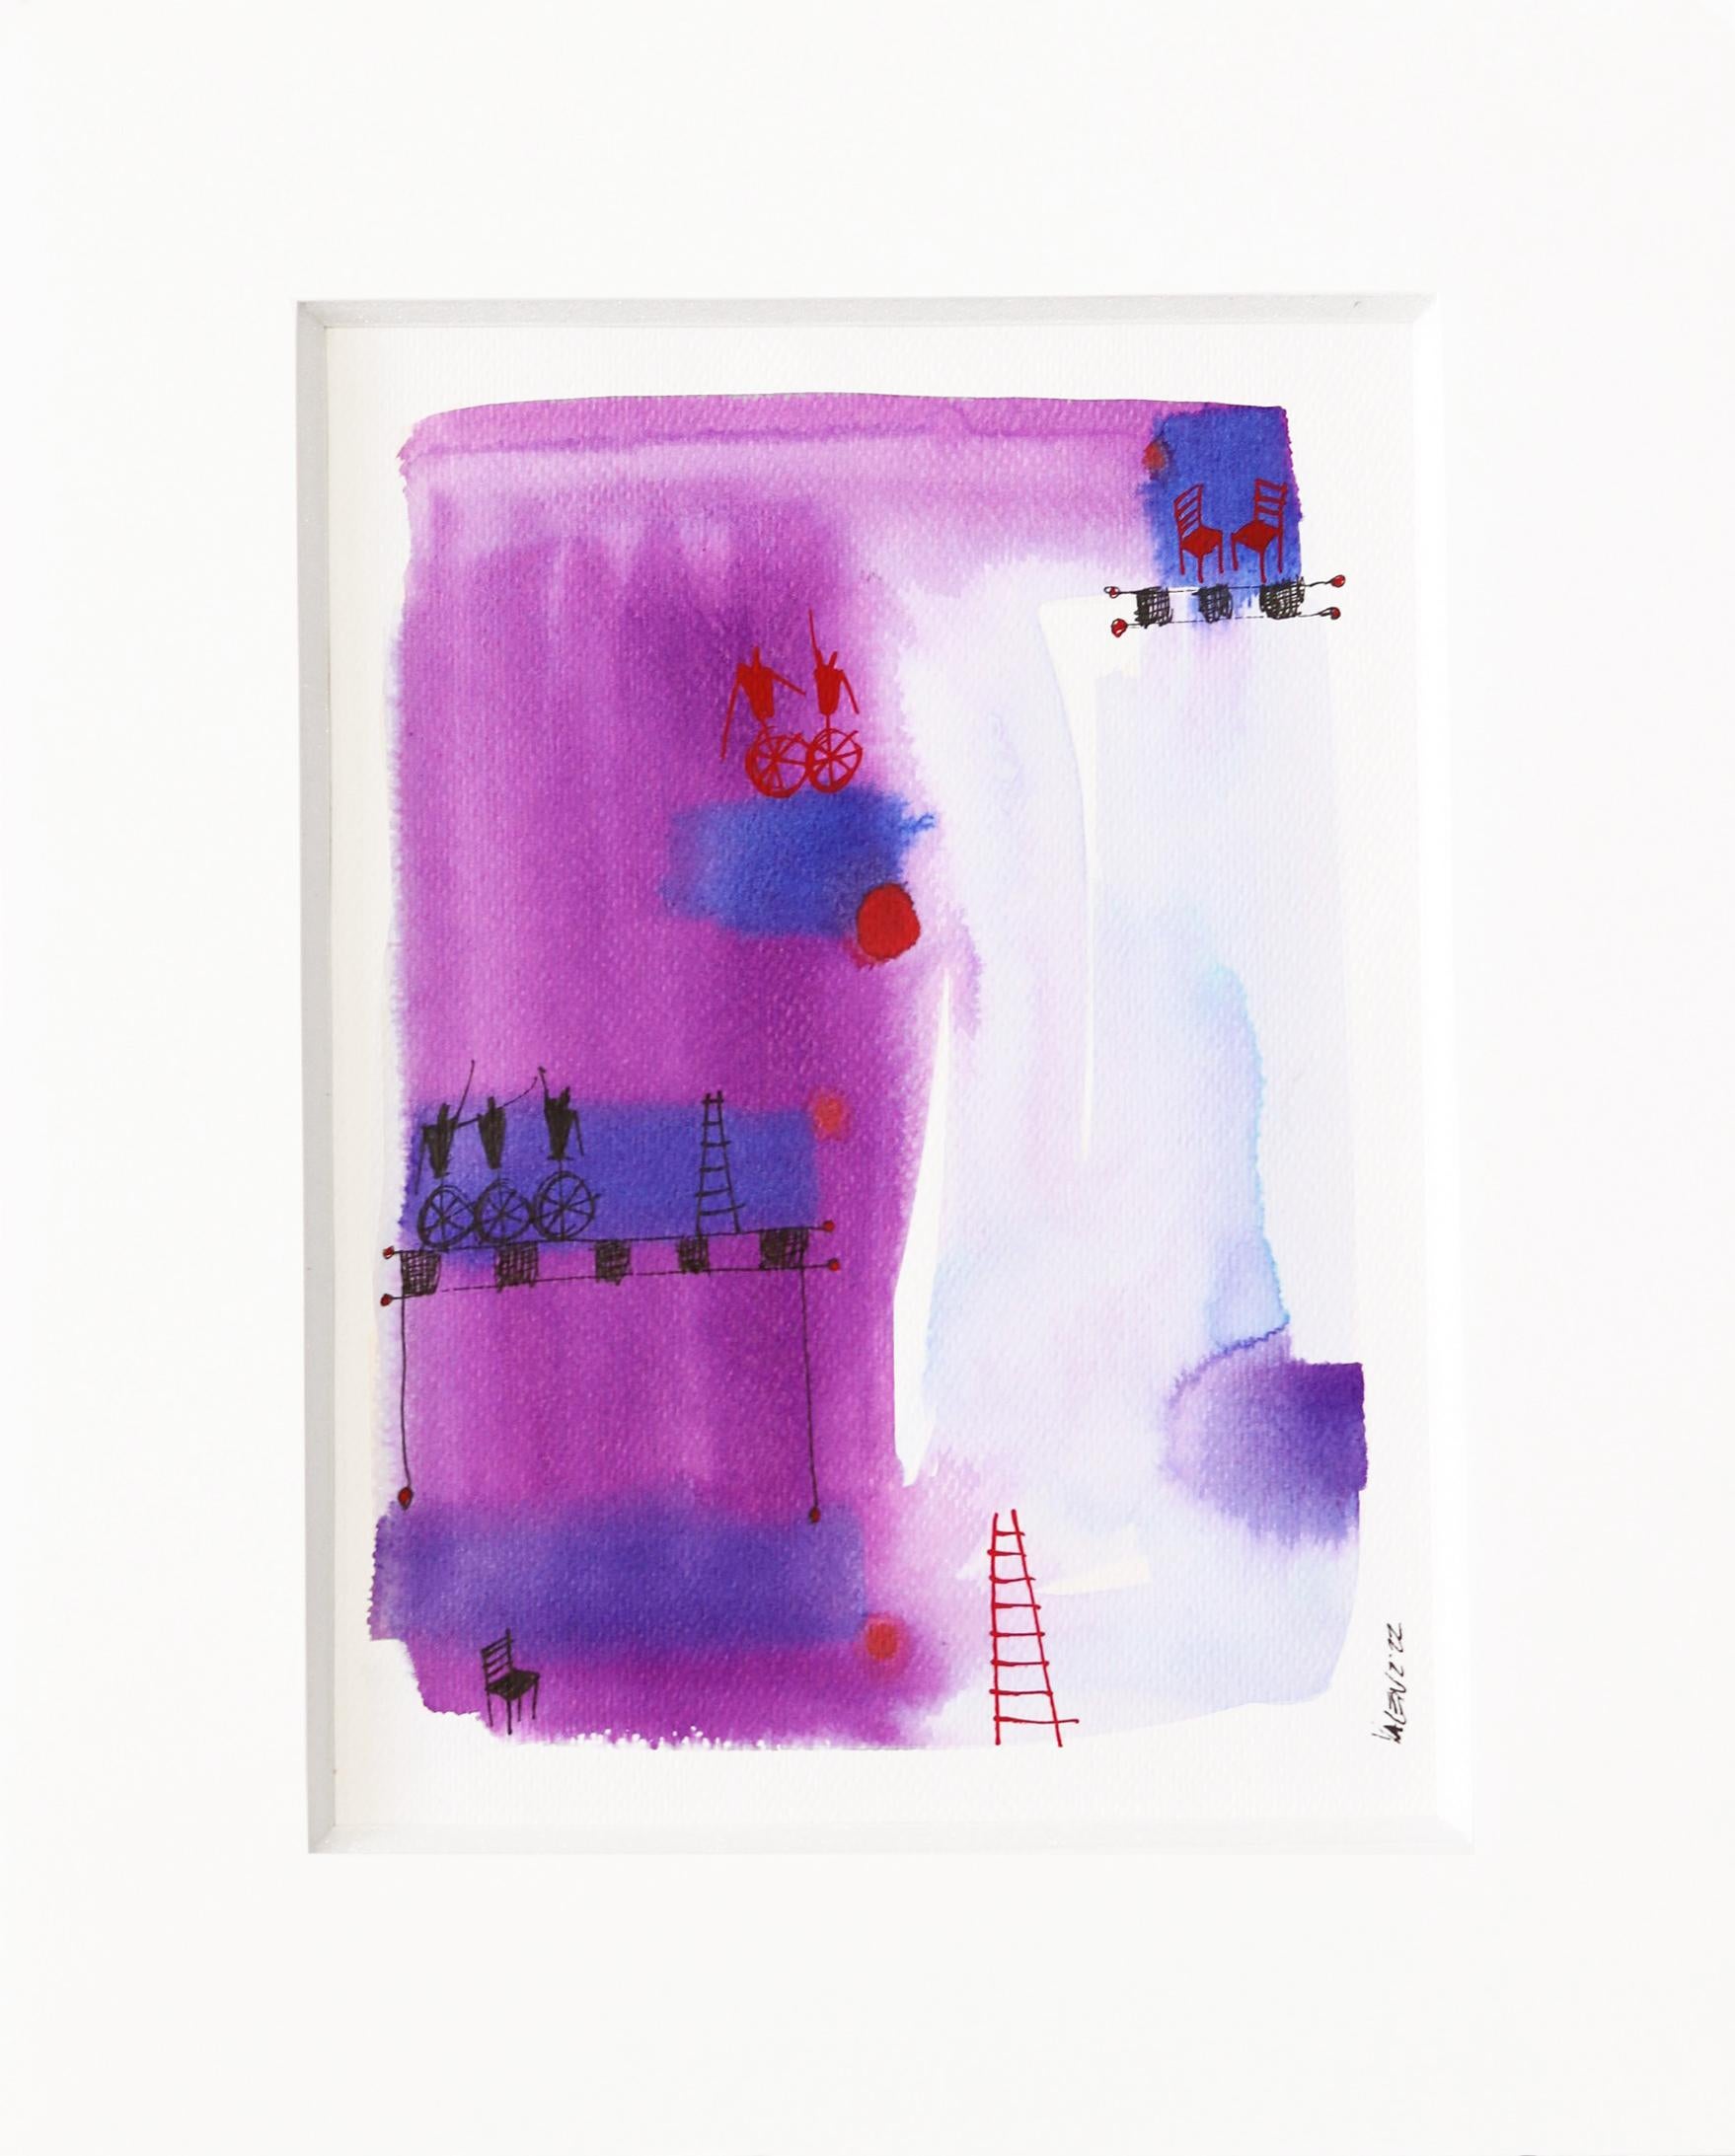 Serie Dibujos Felices 3 - Original Purple Watercolor and Ink Artwork on Paper For Sale 1